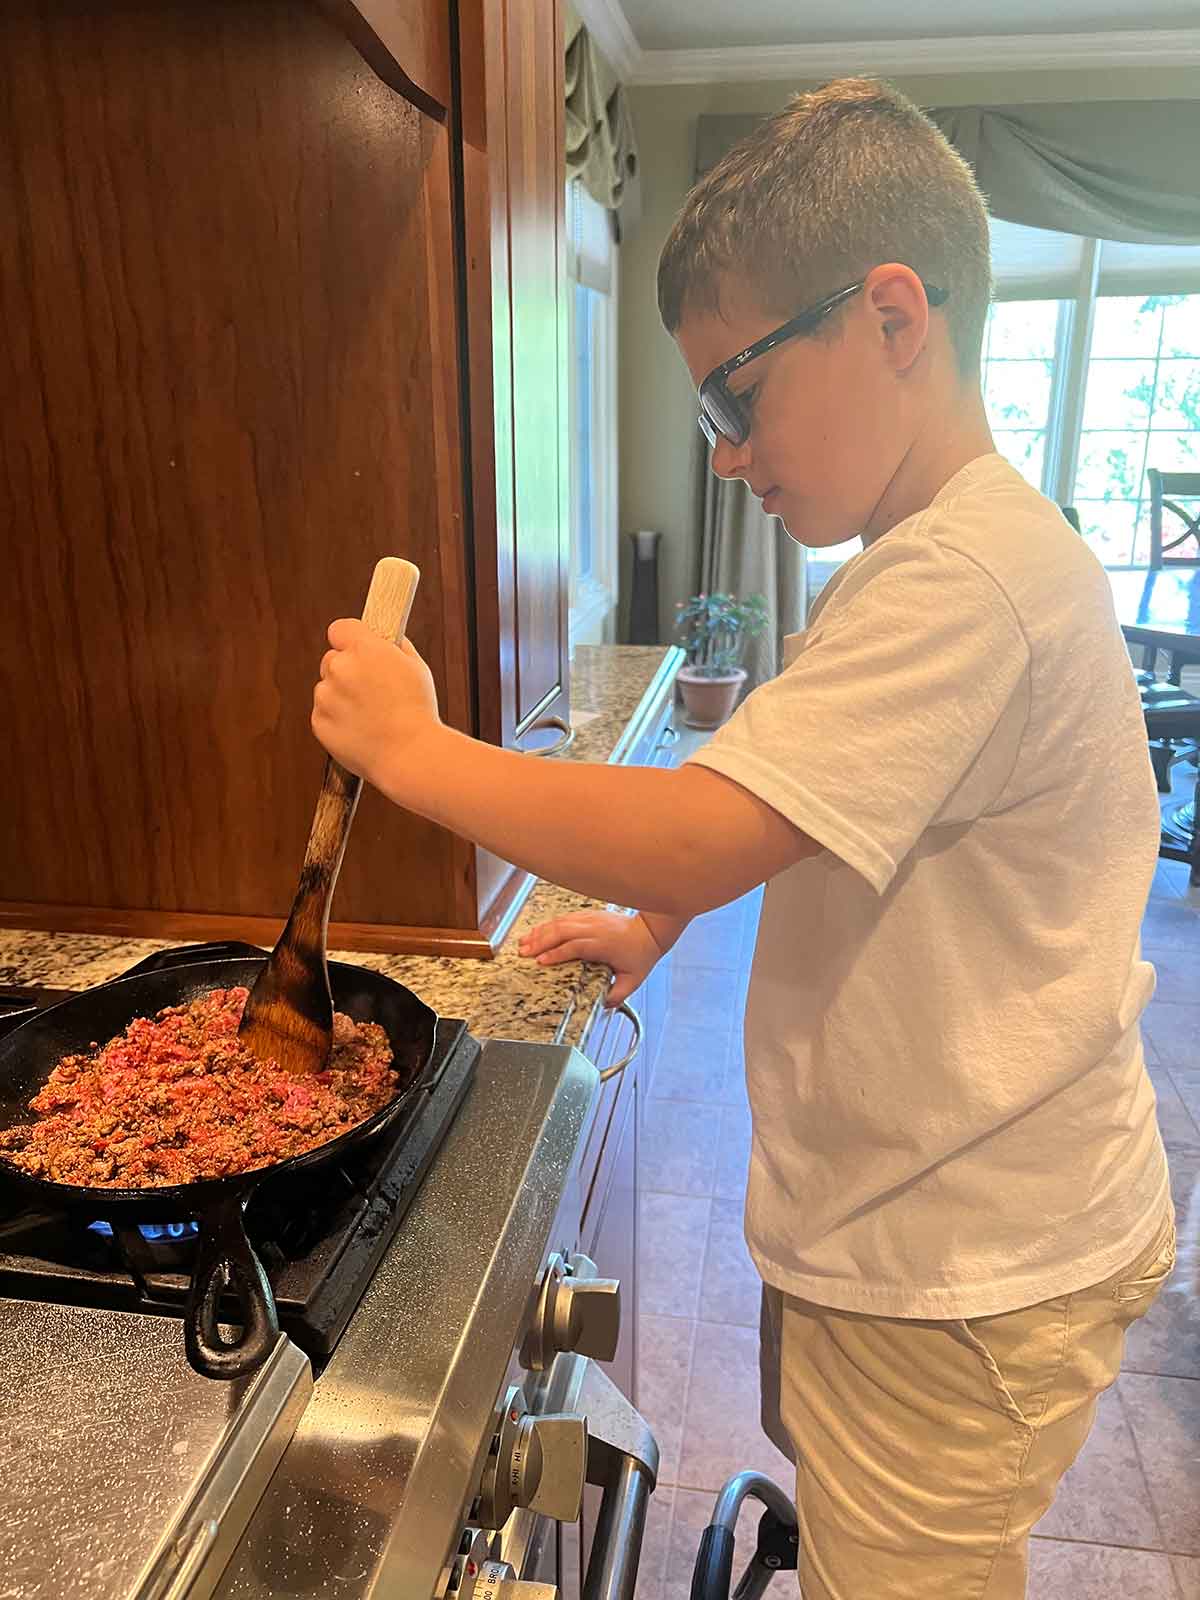 Boy standing at a stove cooking ground beef with a wooden spoon.